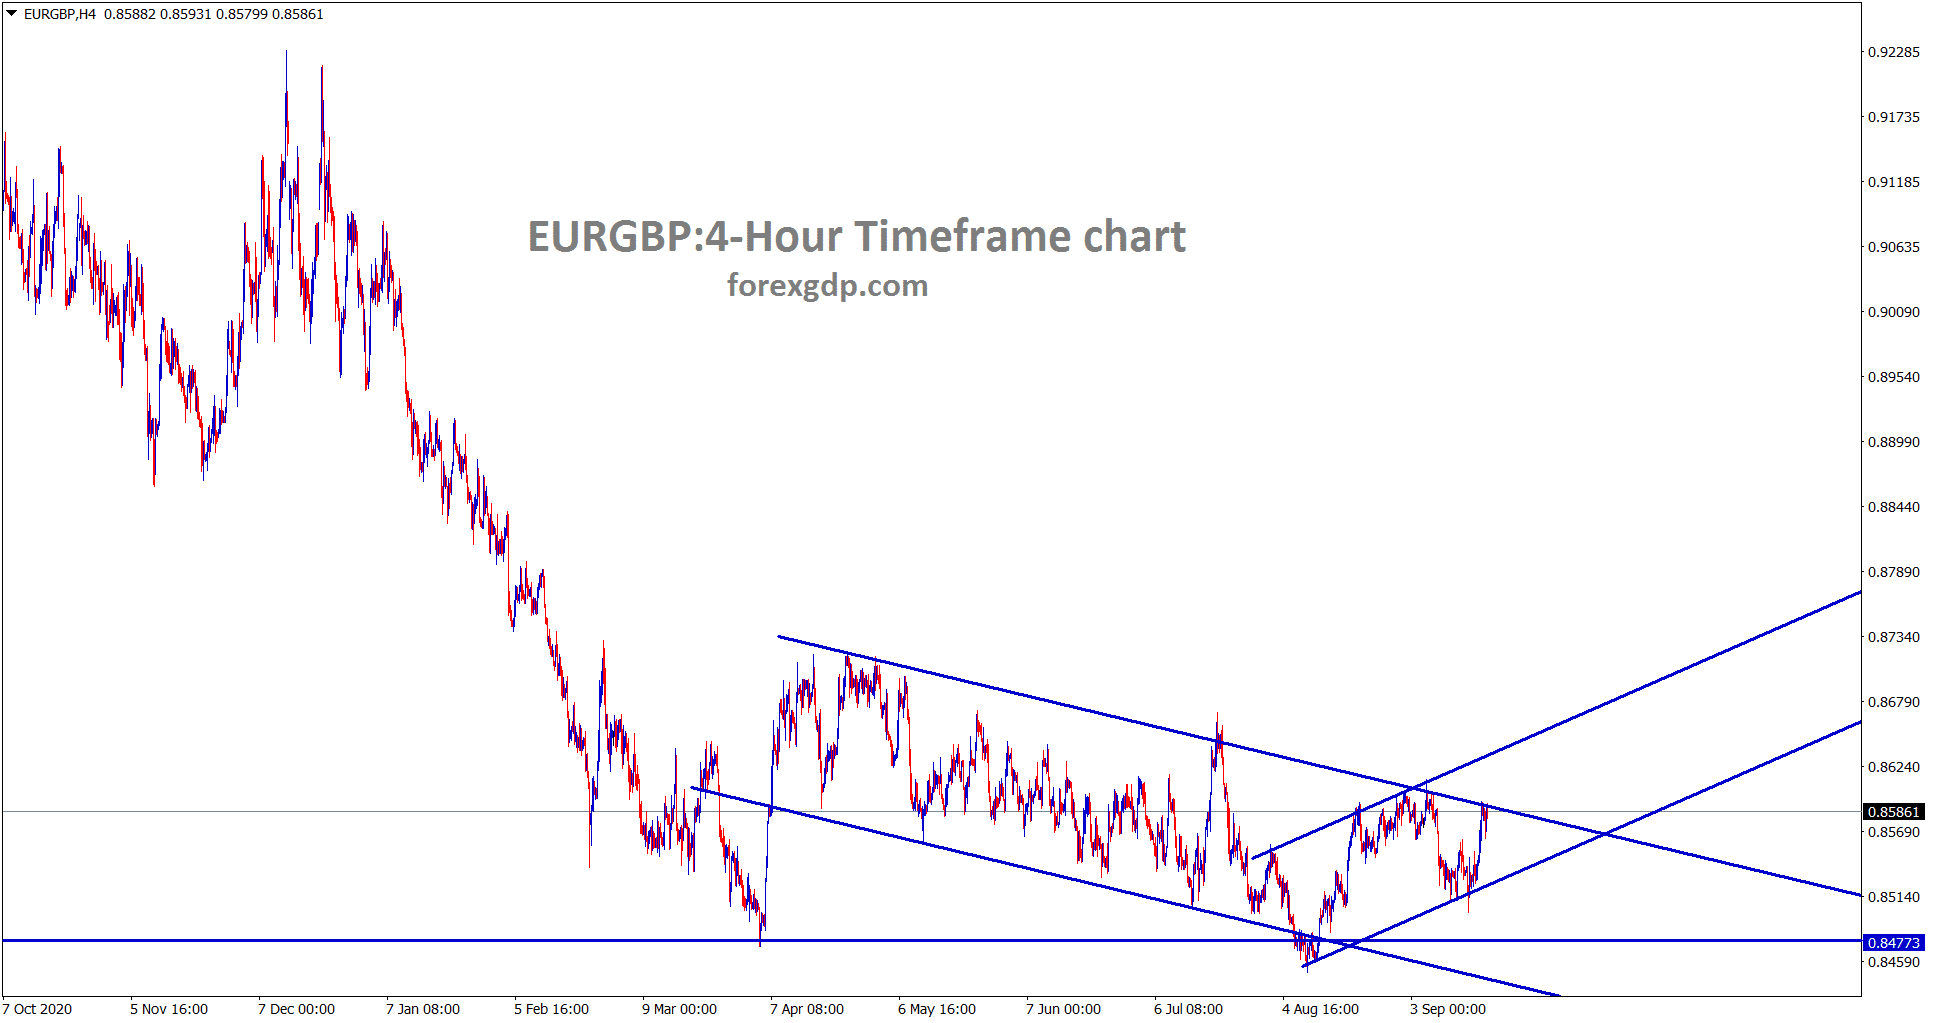 EUGBP is moving in an minor ascending channel now however wait for major descending channel breakout to buy EURGBP